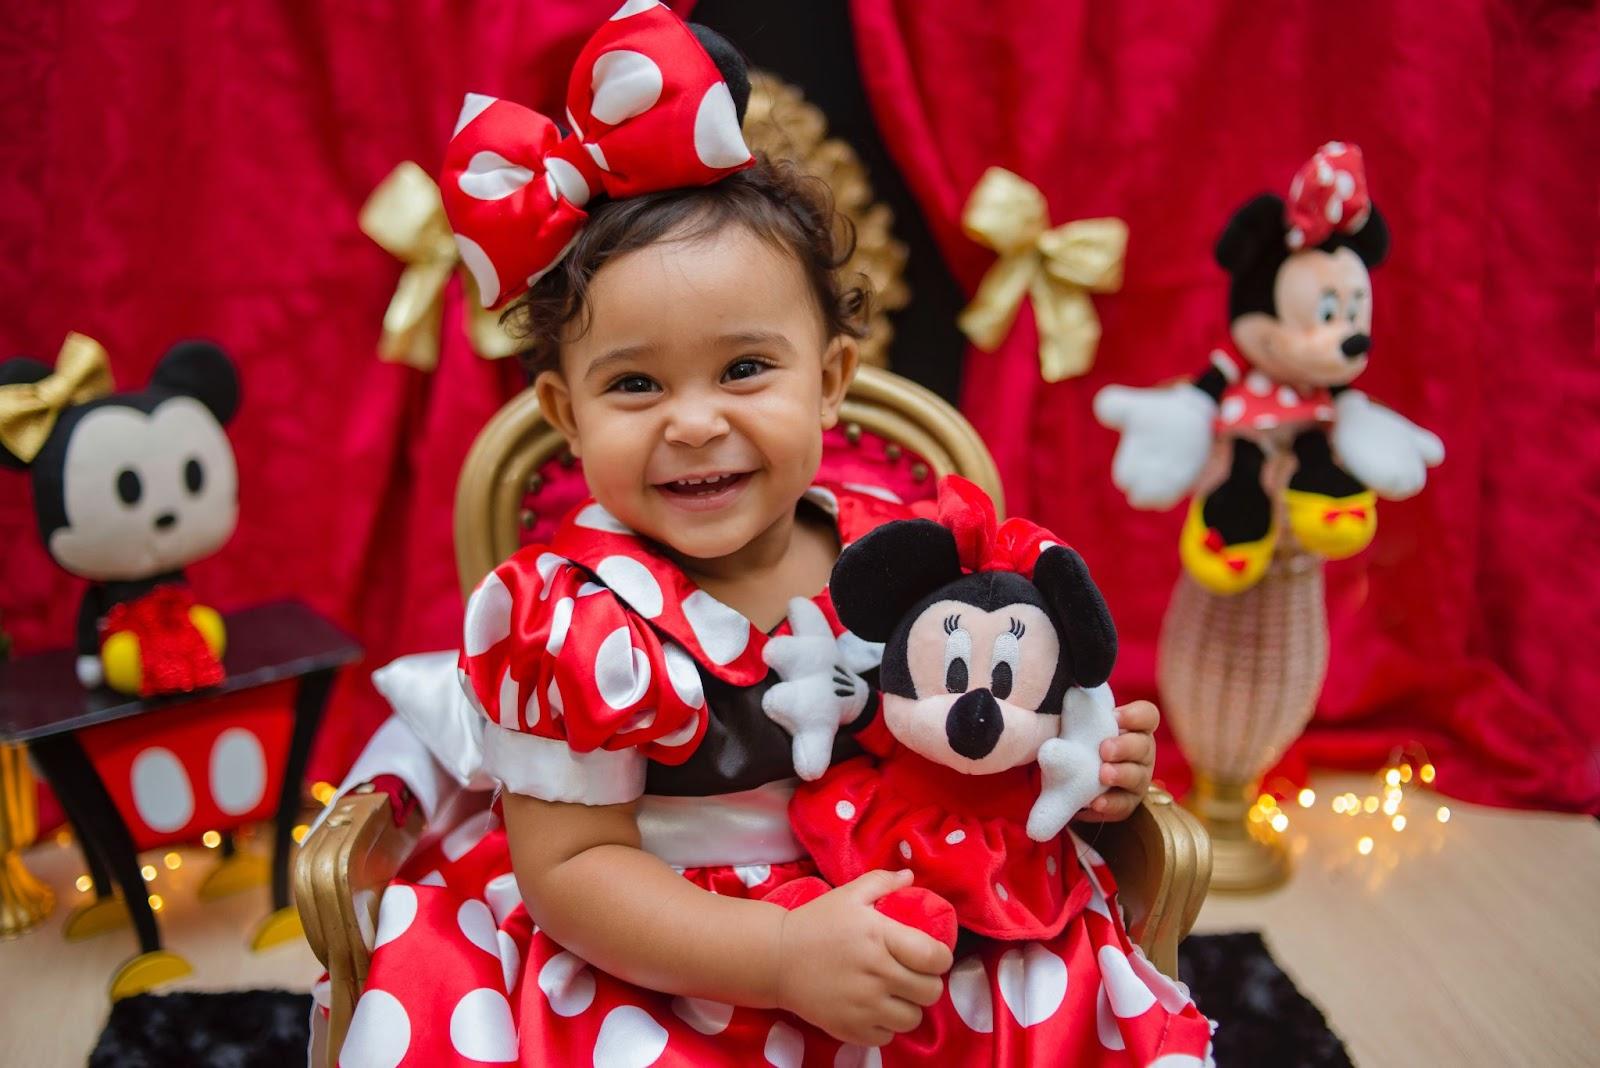 Little girl wearing red dress with white polka dots resembling Minnie Mouse outfit against Disney inspired backdrop - Disney Baby Names - Baby Journey